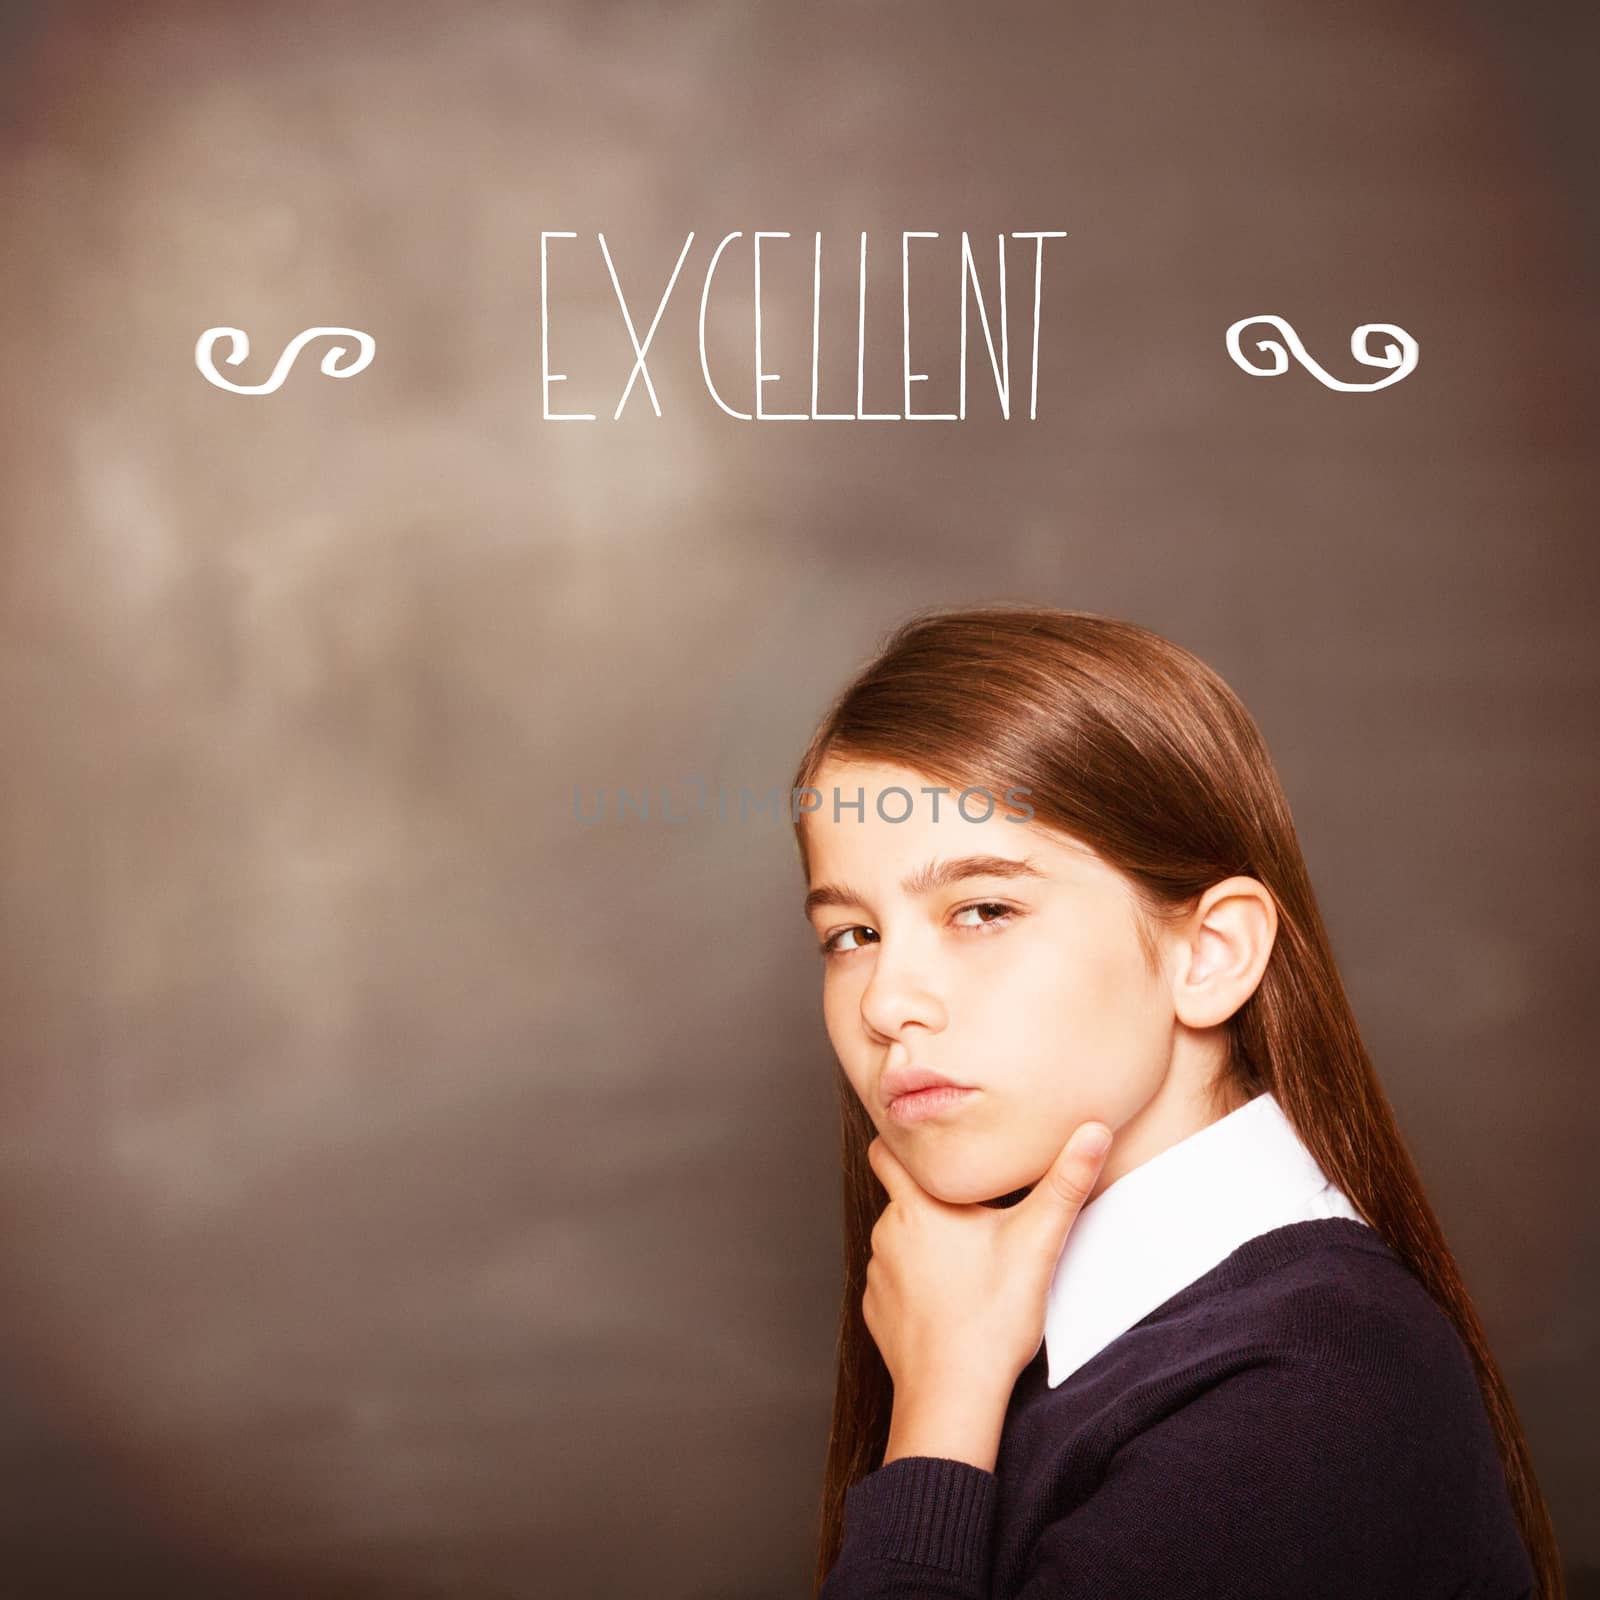 The word excellent! against thinking pupil looking at camera